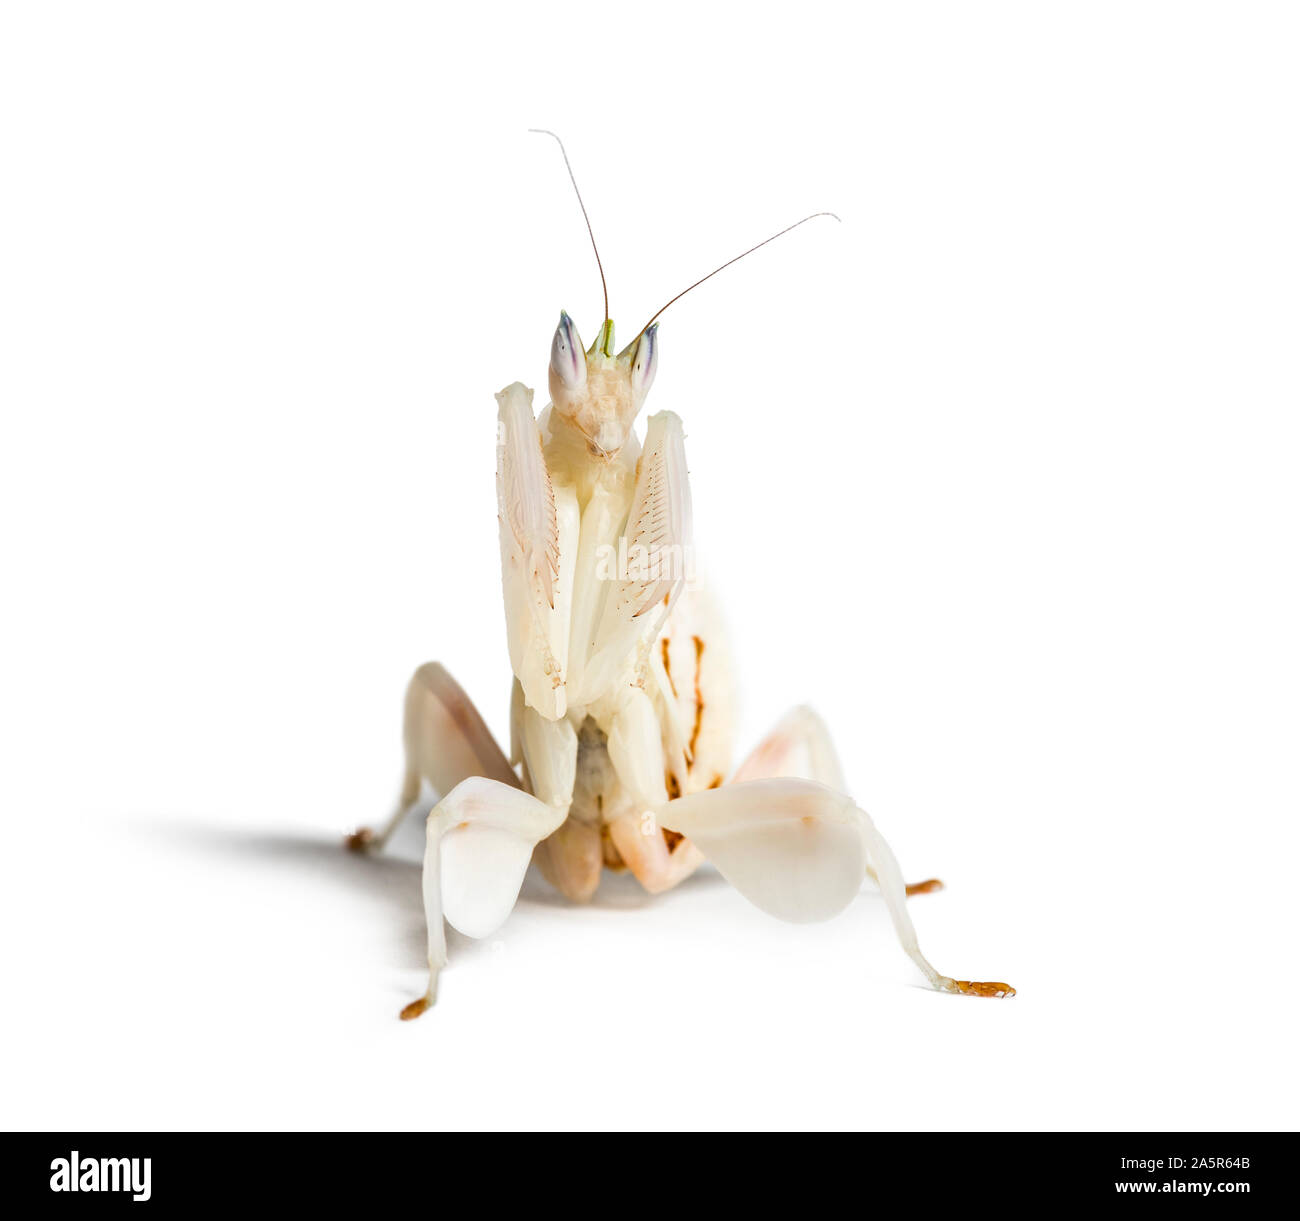 Young orchid mantis, Hymenopus coronatus, in front of white background Stock Photo